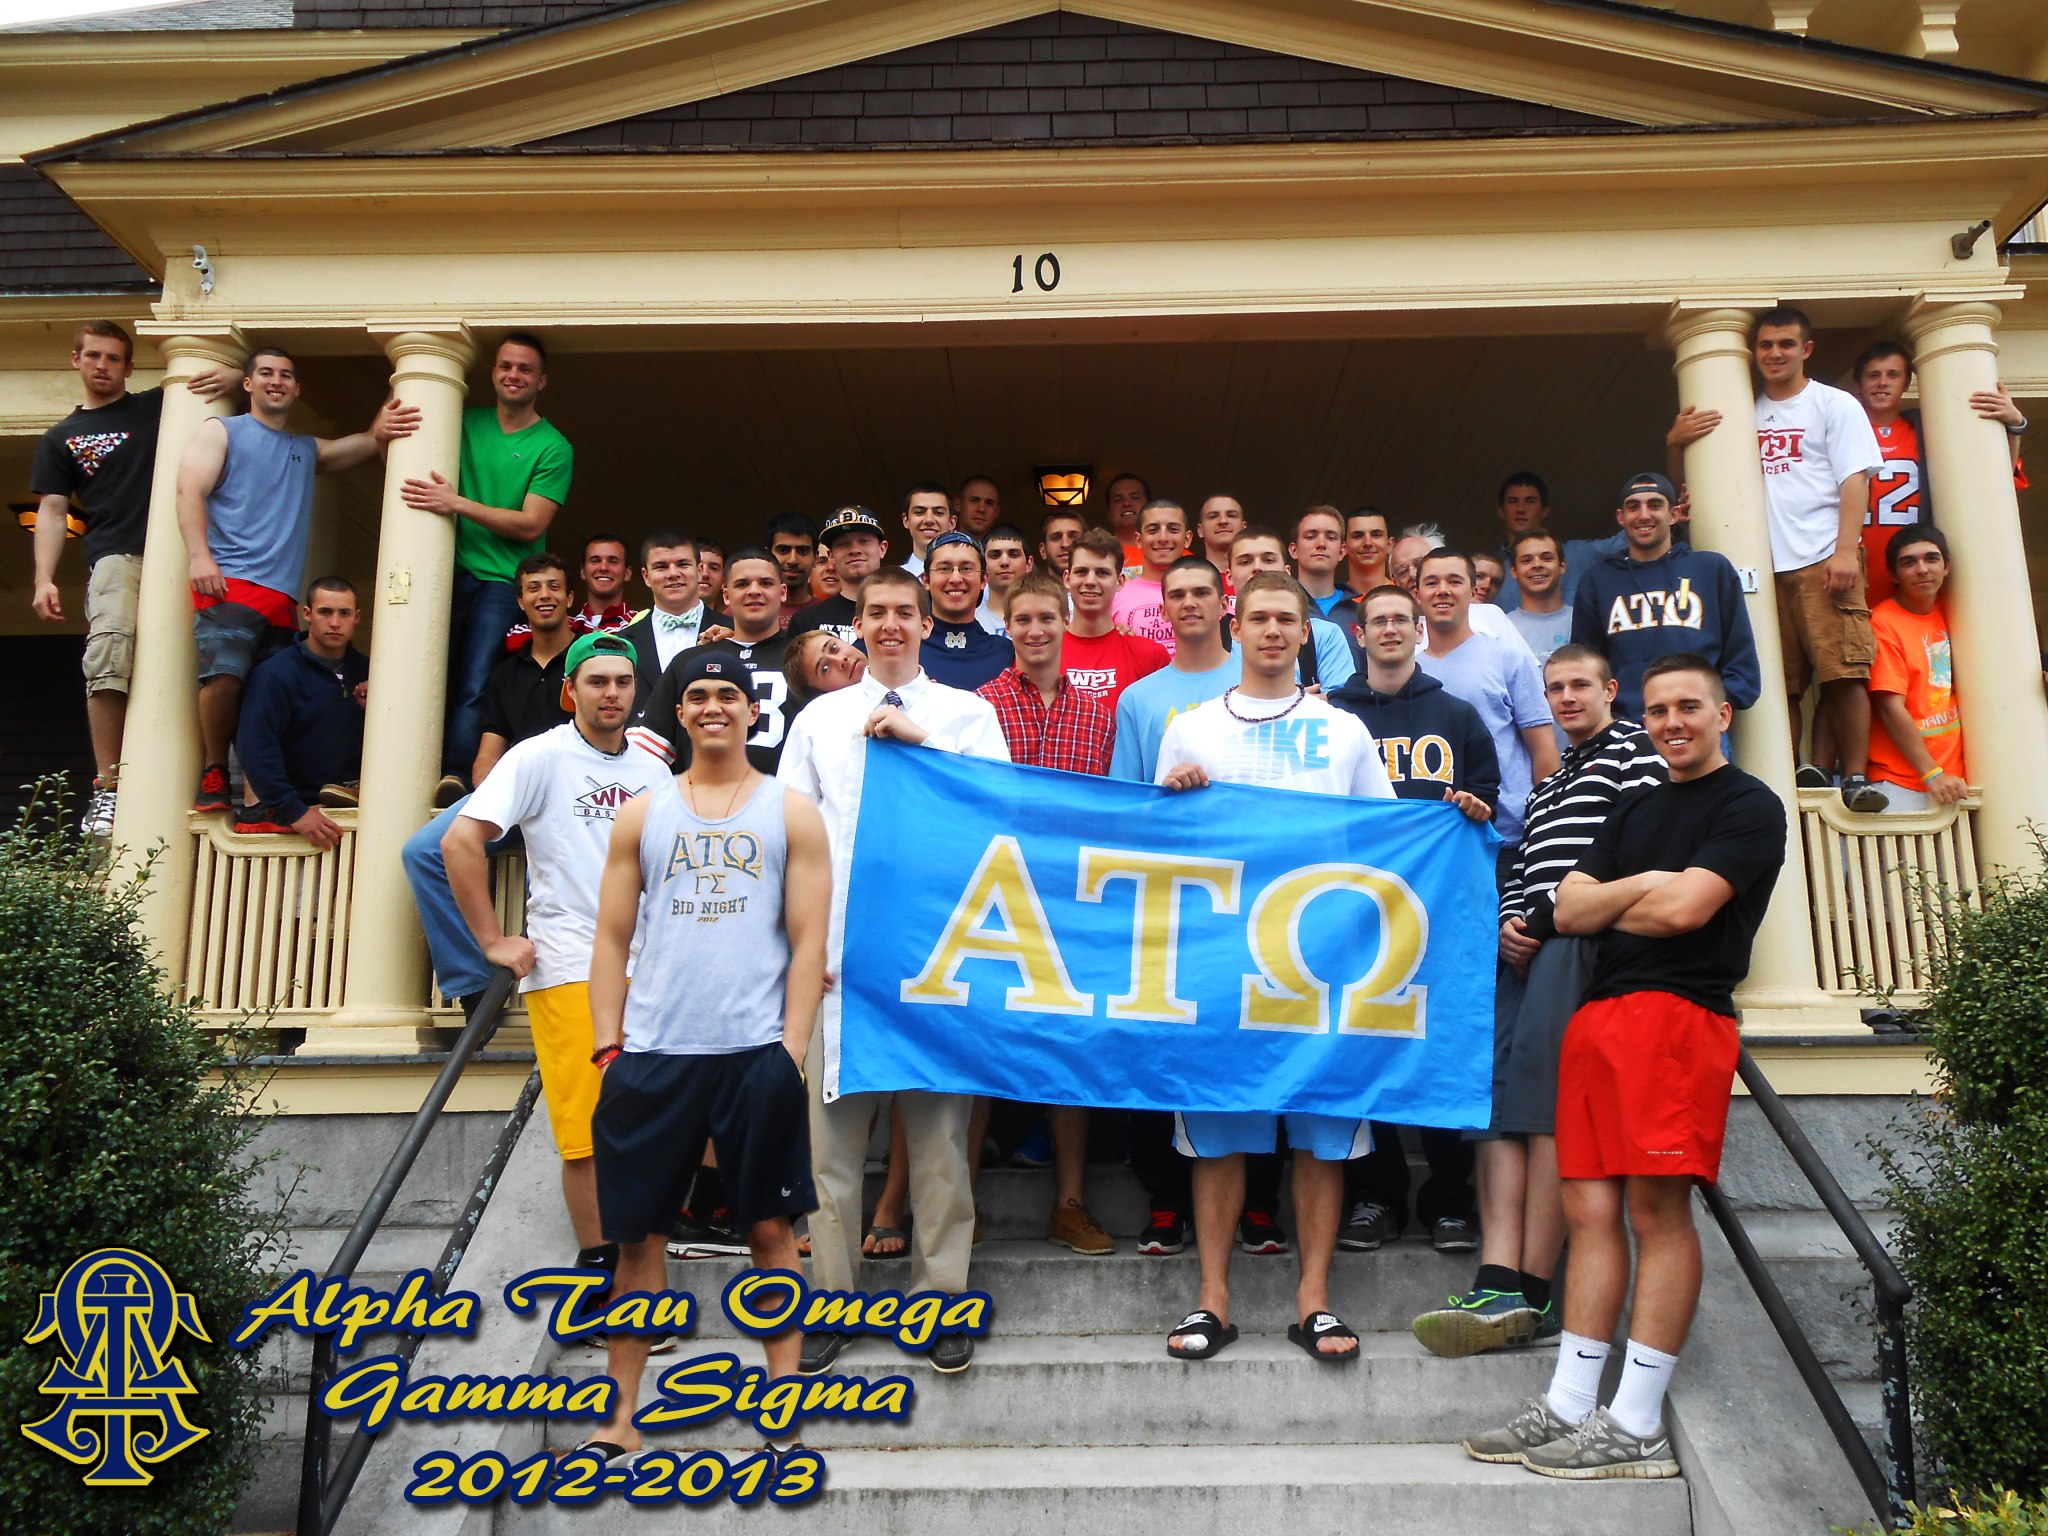 The brothers of Alpha Tau Omega can take care of your fall To Do list